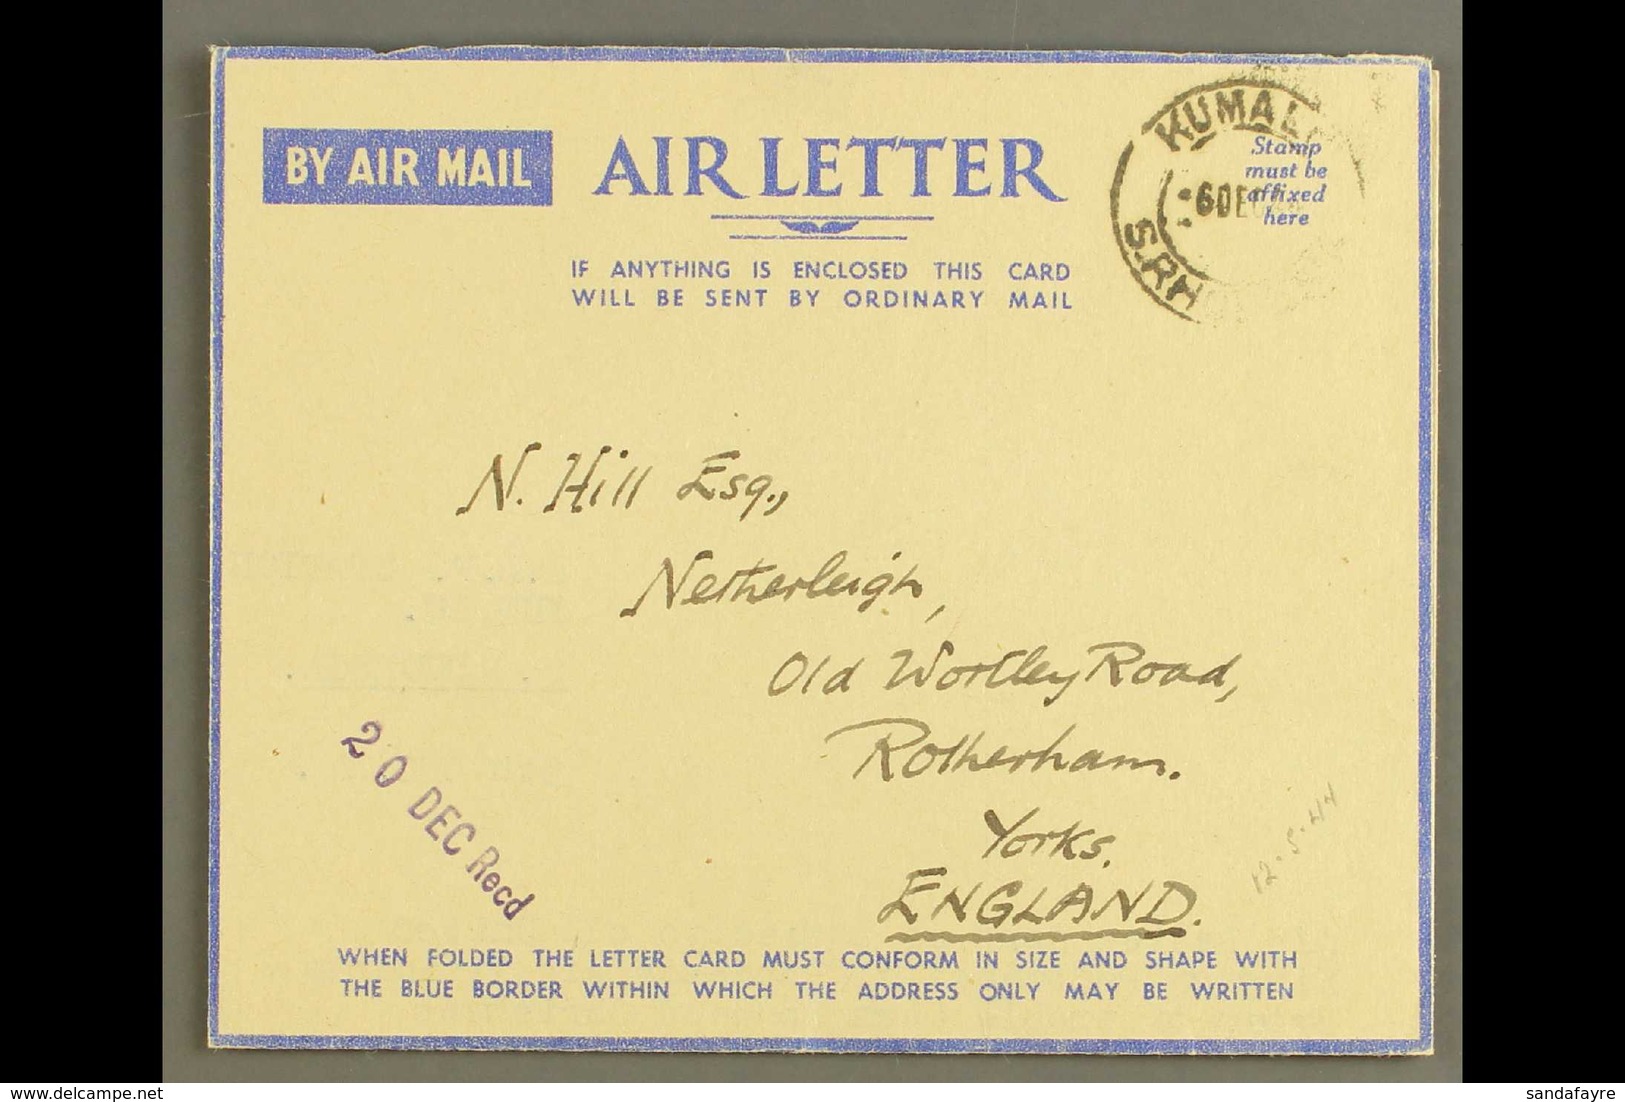 MILITARY AEROGRAMME  1944 (6 Dec) Stampless Air Letter For Christmas Post Concession Primarily For RAF Personnel, Cancel - Südrhodesien (...-1964)